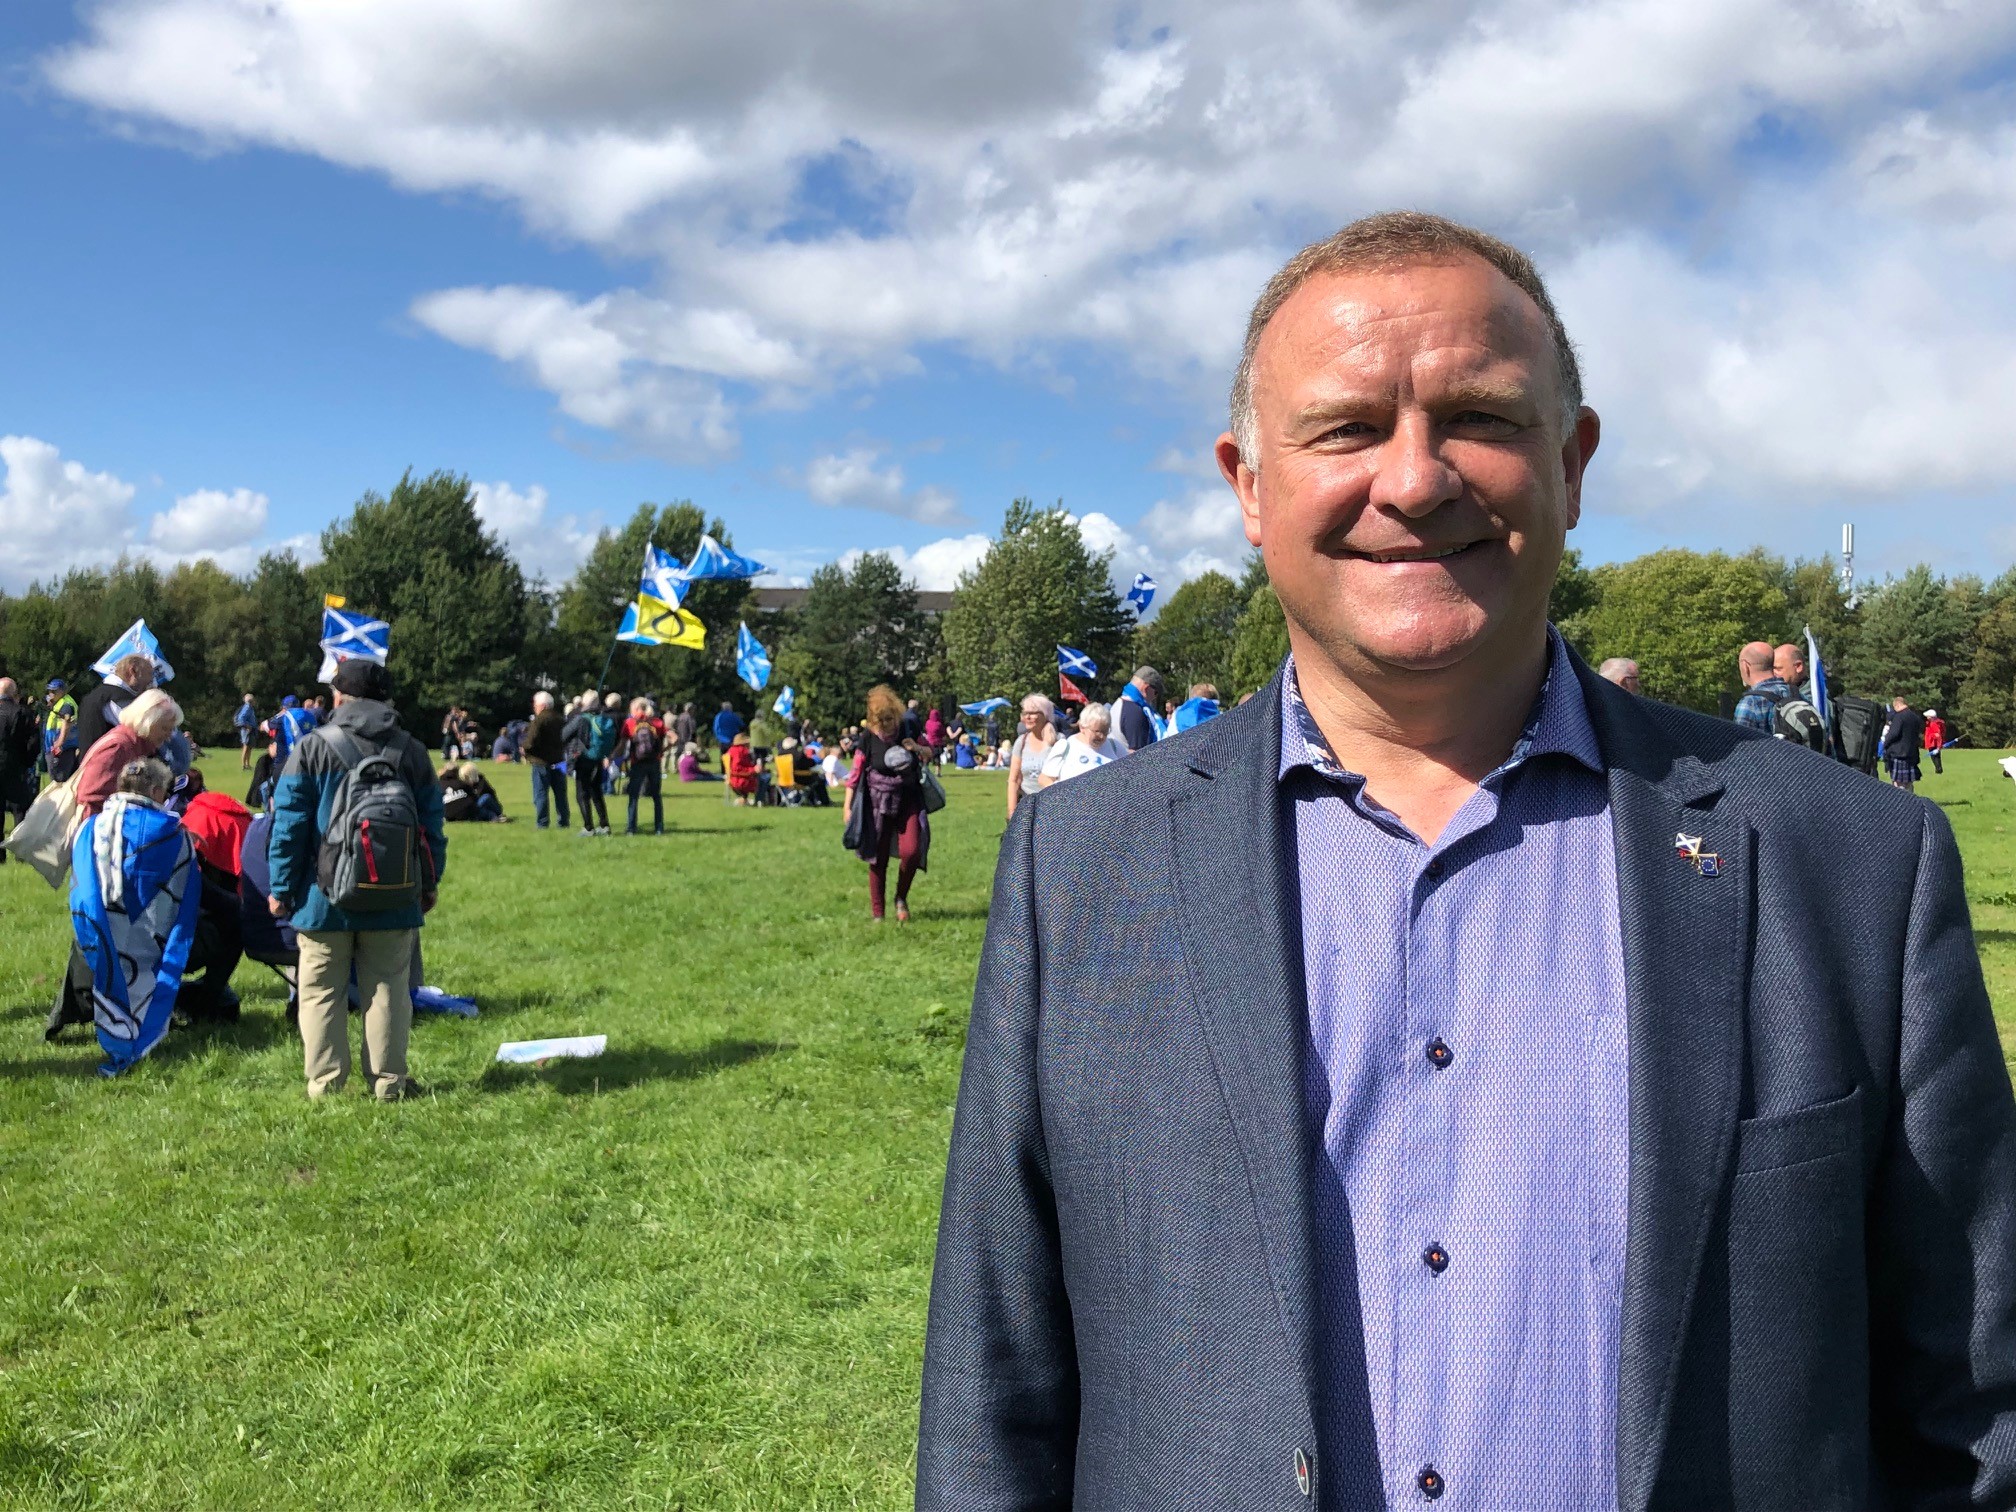 MP Drew Hendry hailed the largest pro-independence march turnout in the region since the onset of the pandemic.